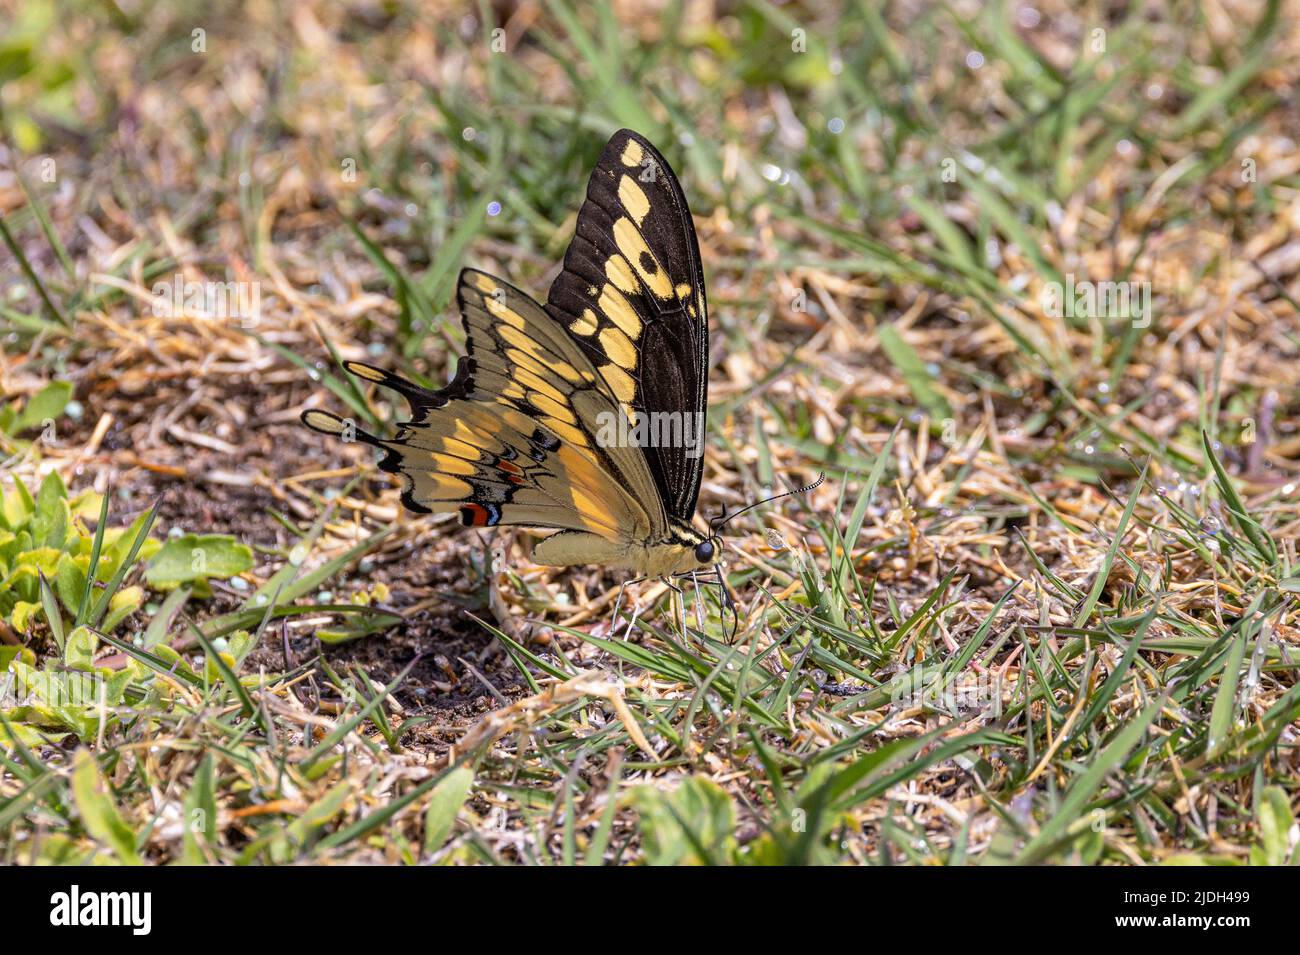 giant swallowtail (Papilio cresphontes), drinks dewdrops from the grass, USA, Arizona, Sonoran Stock Photo